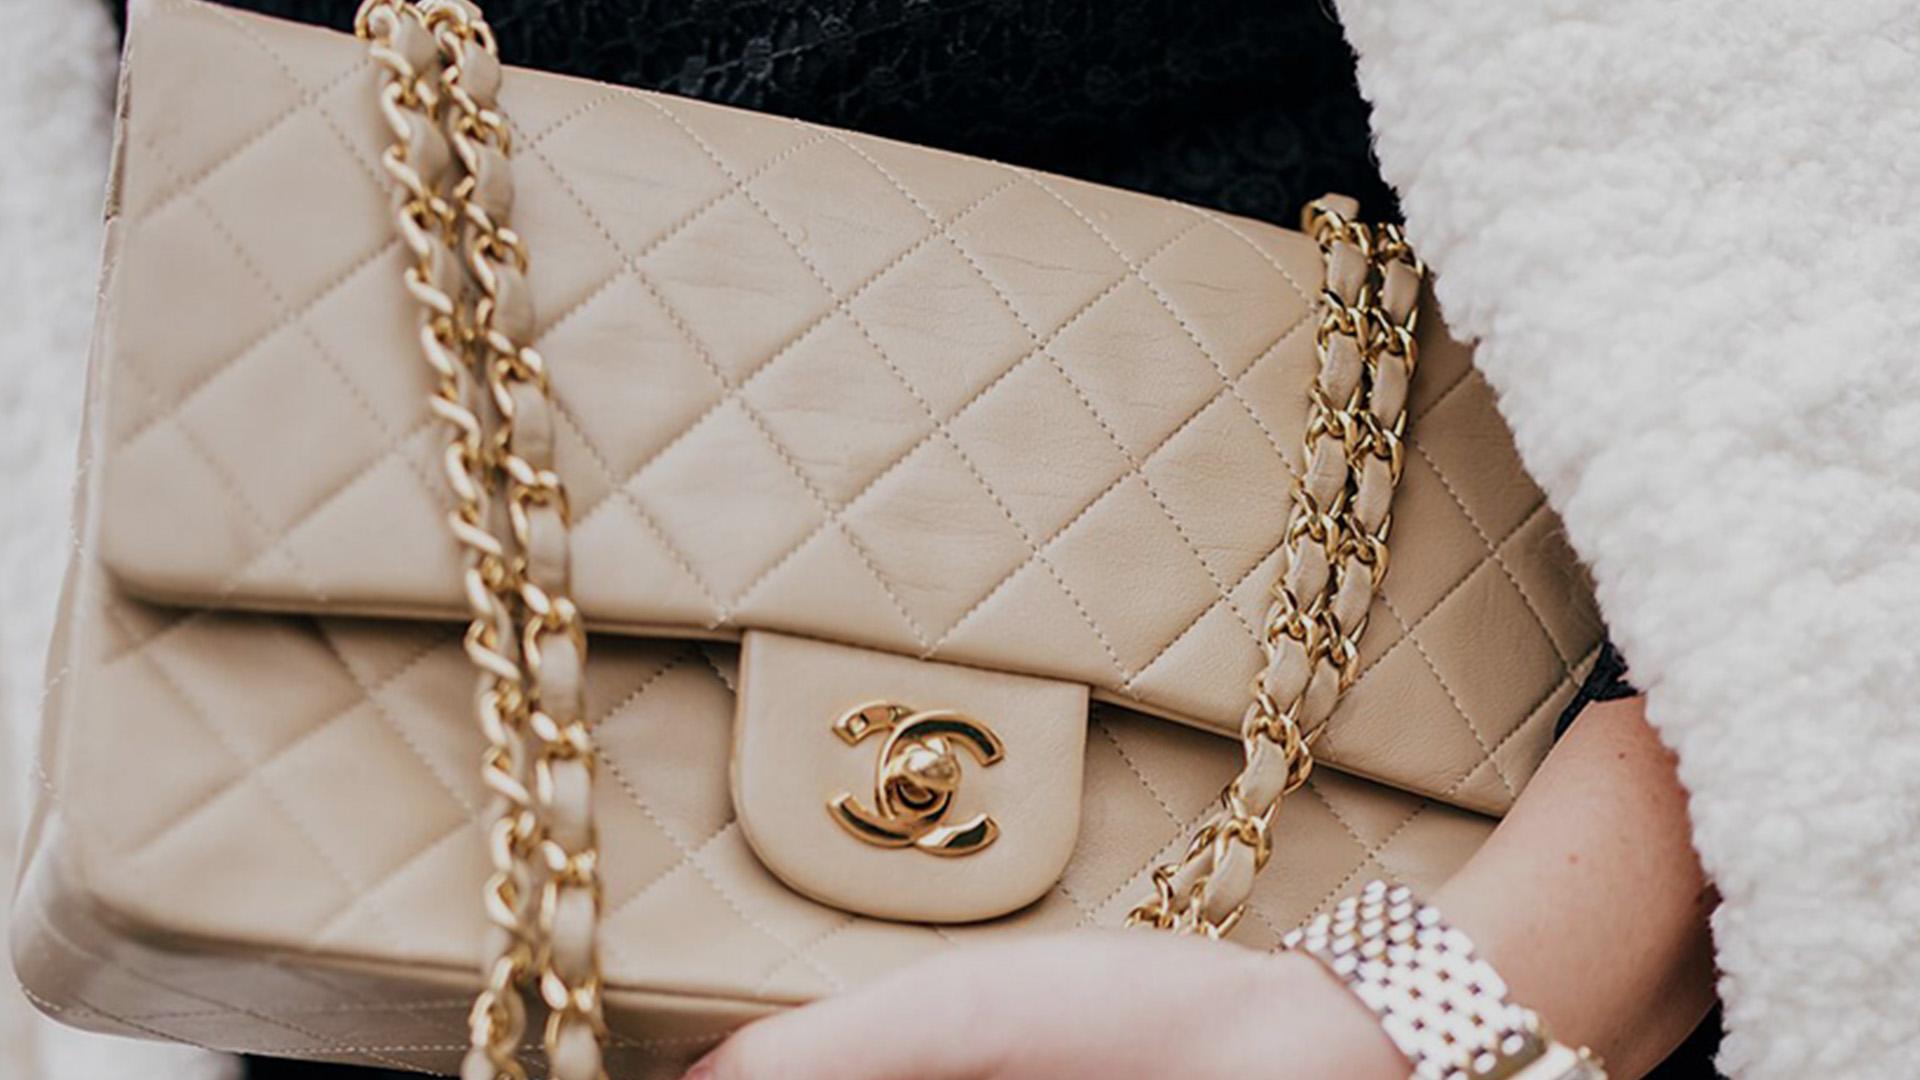 chanel bags with chain